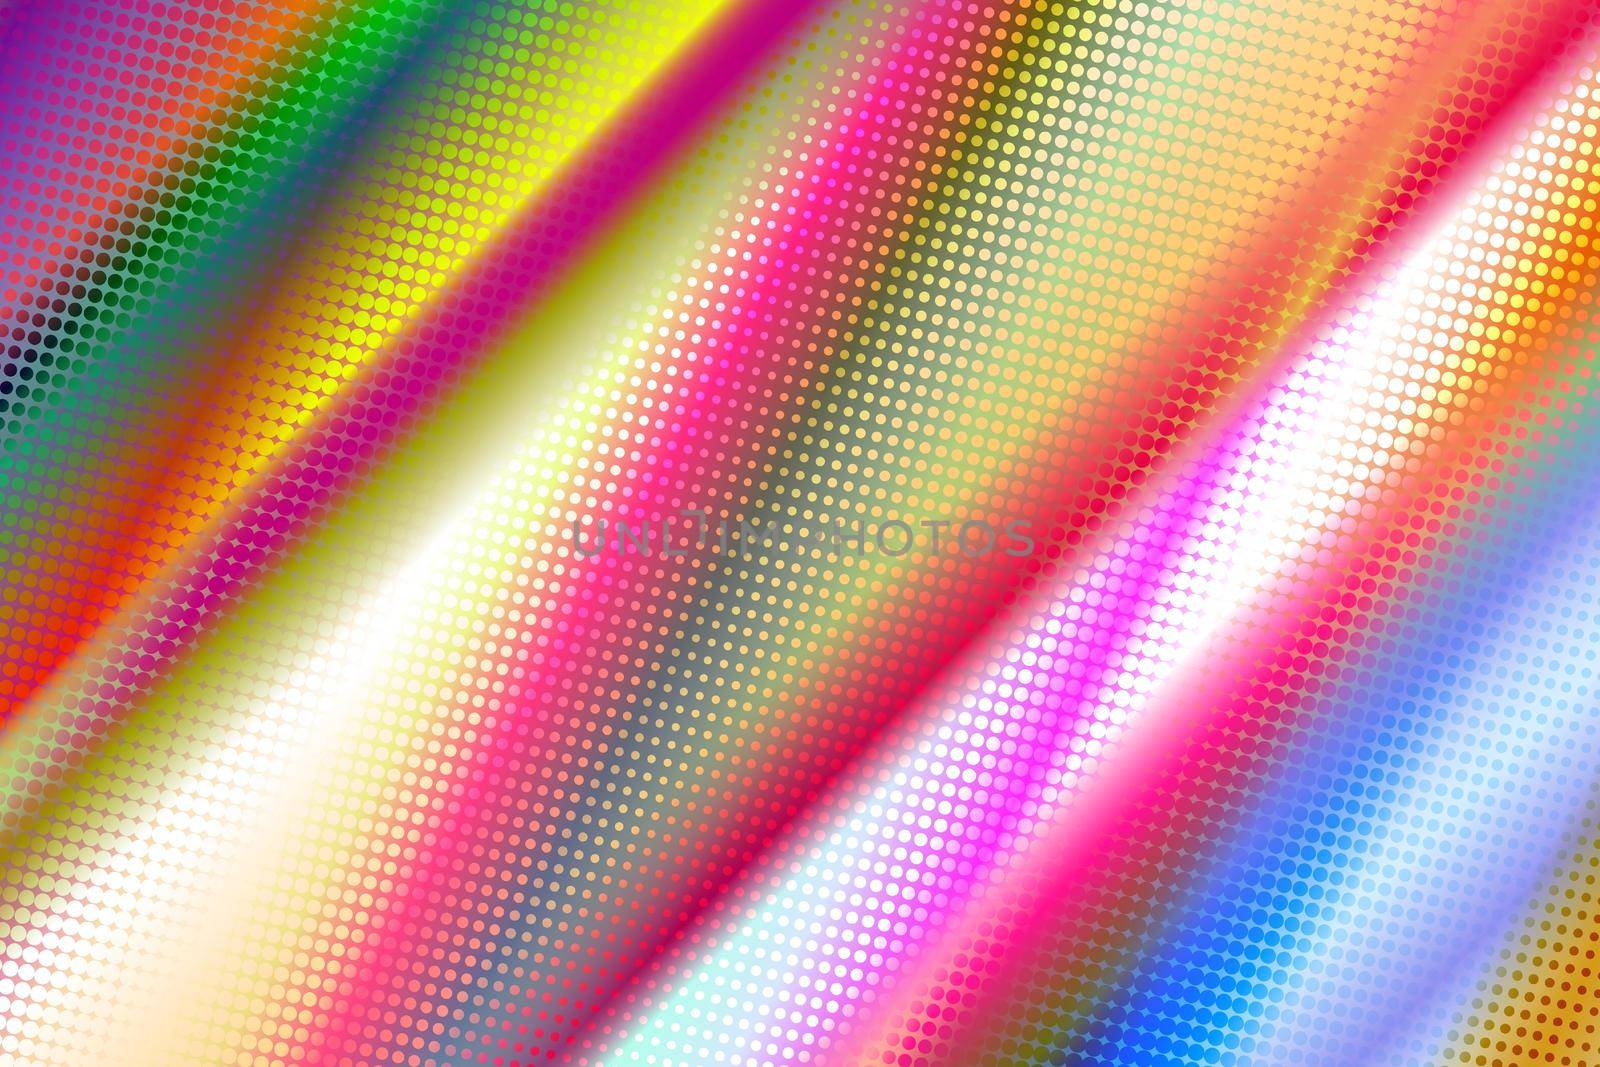 Futuristic abstract colorful geometric background. Creative illustration in halftone style with rainbow gradient. Pattern for wallpaper, banner, web page, .